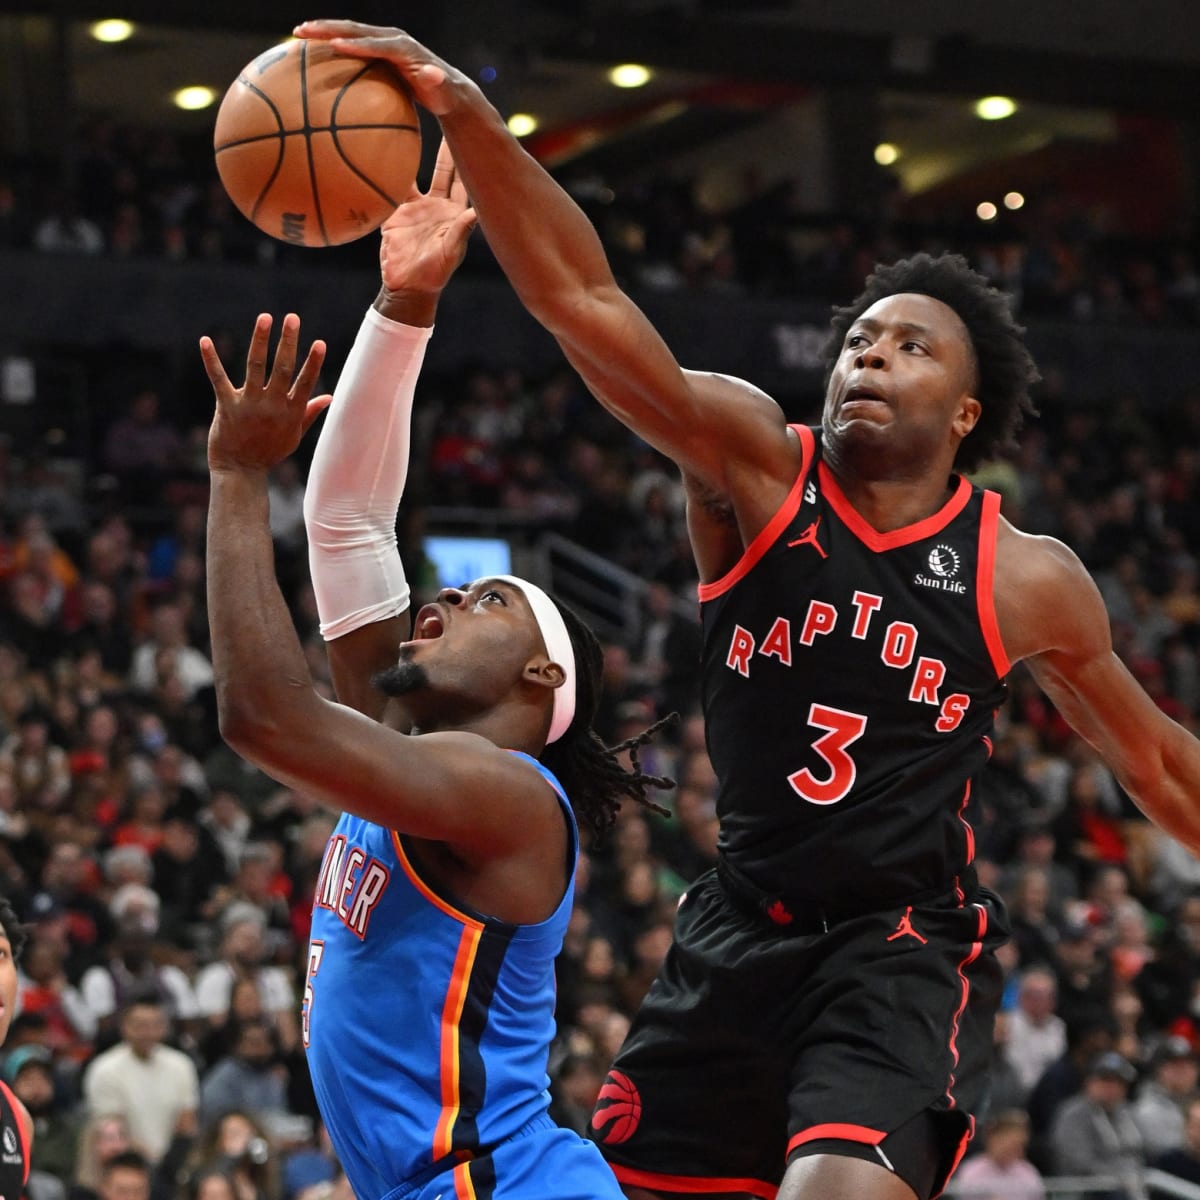 OG Anunoby, Raptors' OG Anunoby To The Thunders Trade In Proposal